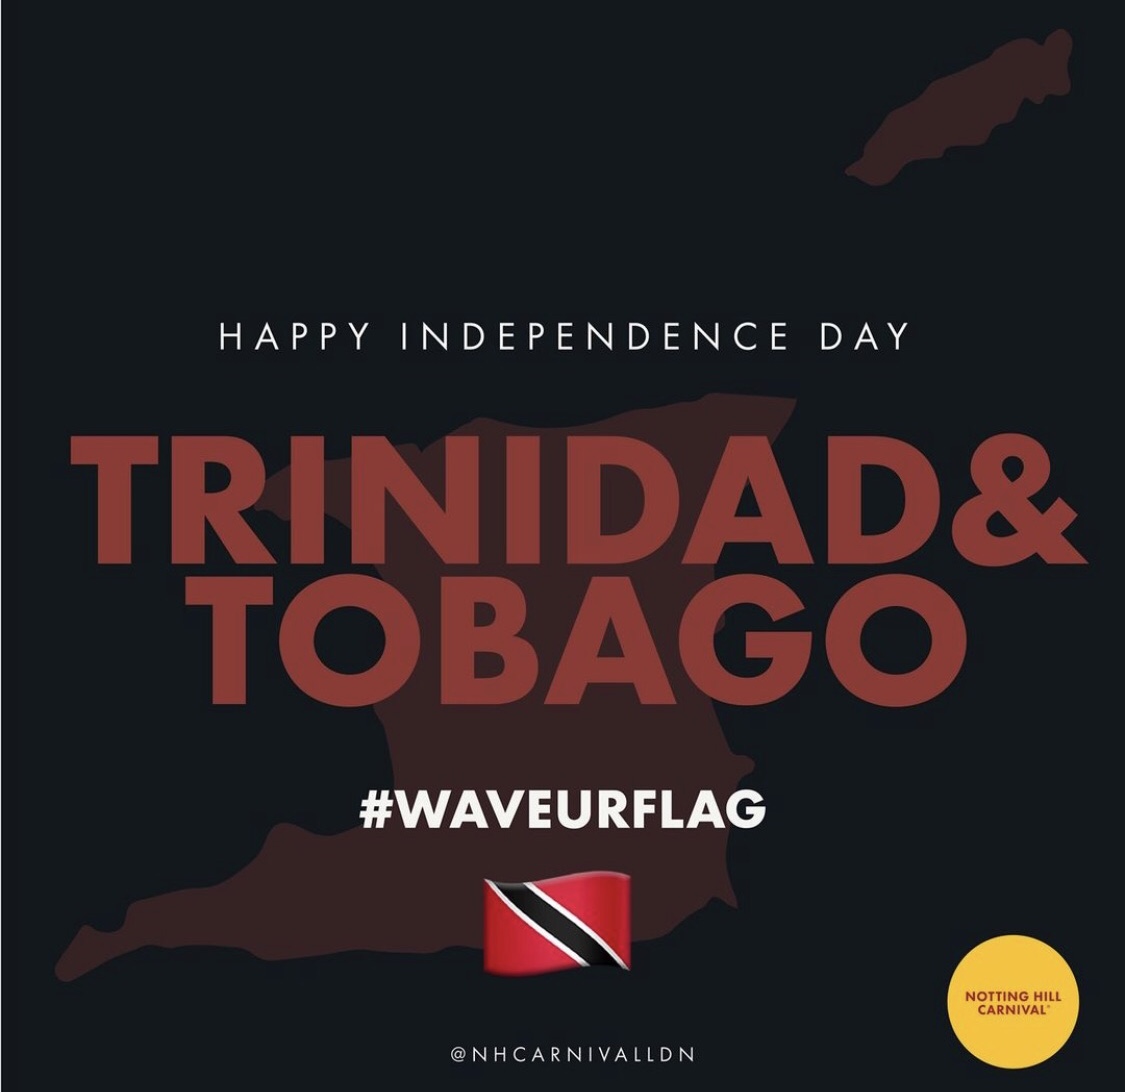 Sweet, sweet T 'n' T! 🎶🎵 Trinidad & Tobago! Happy Independence Day! Wave Your Flag! 🇹🇹🇹🇹🇹🇹🇹🇹🇹🇹 #NHC #NottingHillCarnival #Trinidad #TrinidadAndTobago #Trini #IndependenceDay #HappyIndependenceDay #CaribbeanIndependence #CaribbeanCulture